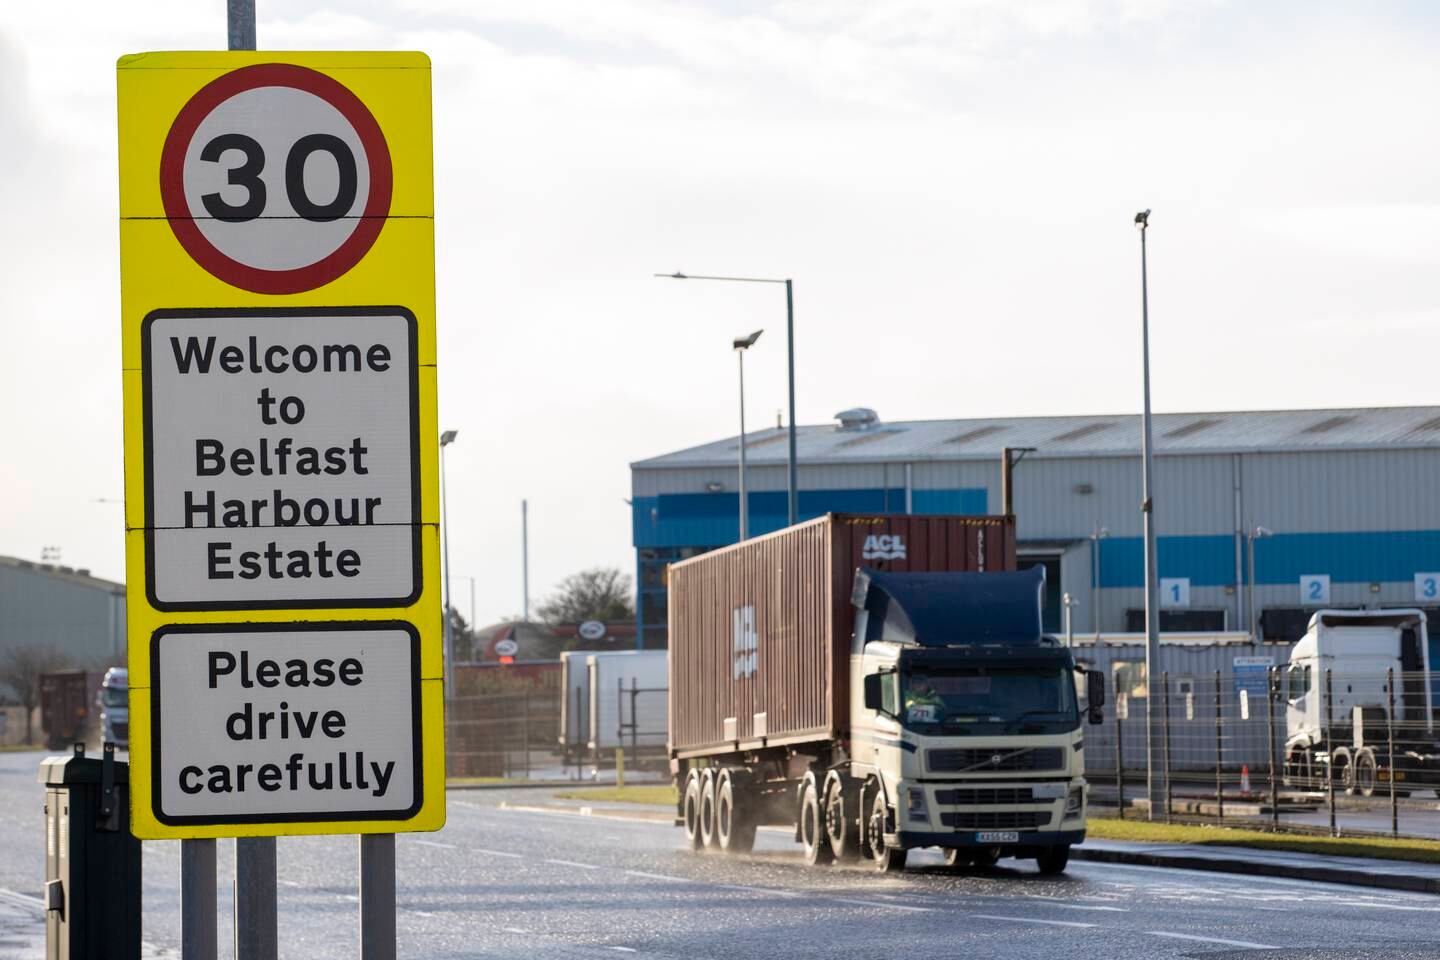 A lorry drives past a sign welcoming drivers to Belfast Harbour Estate in Belfast, Northern Ireland, Britain, 04 February 2022. EPA